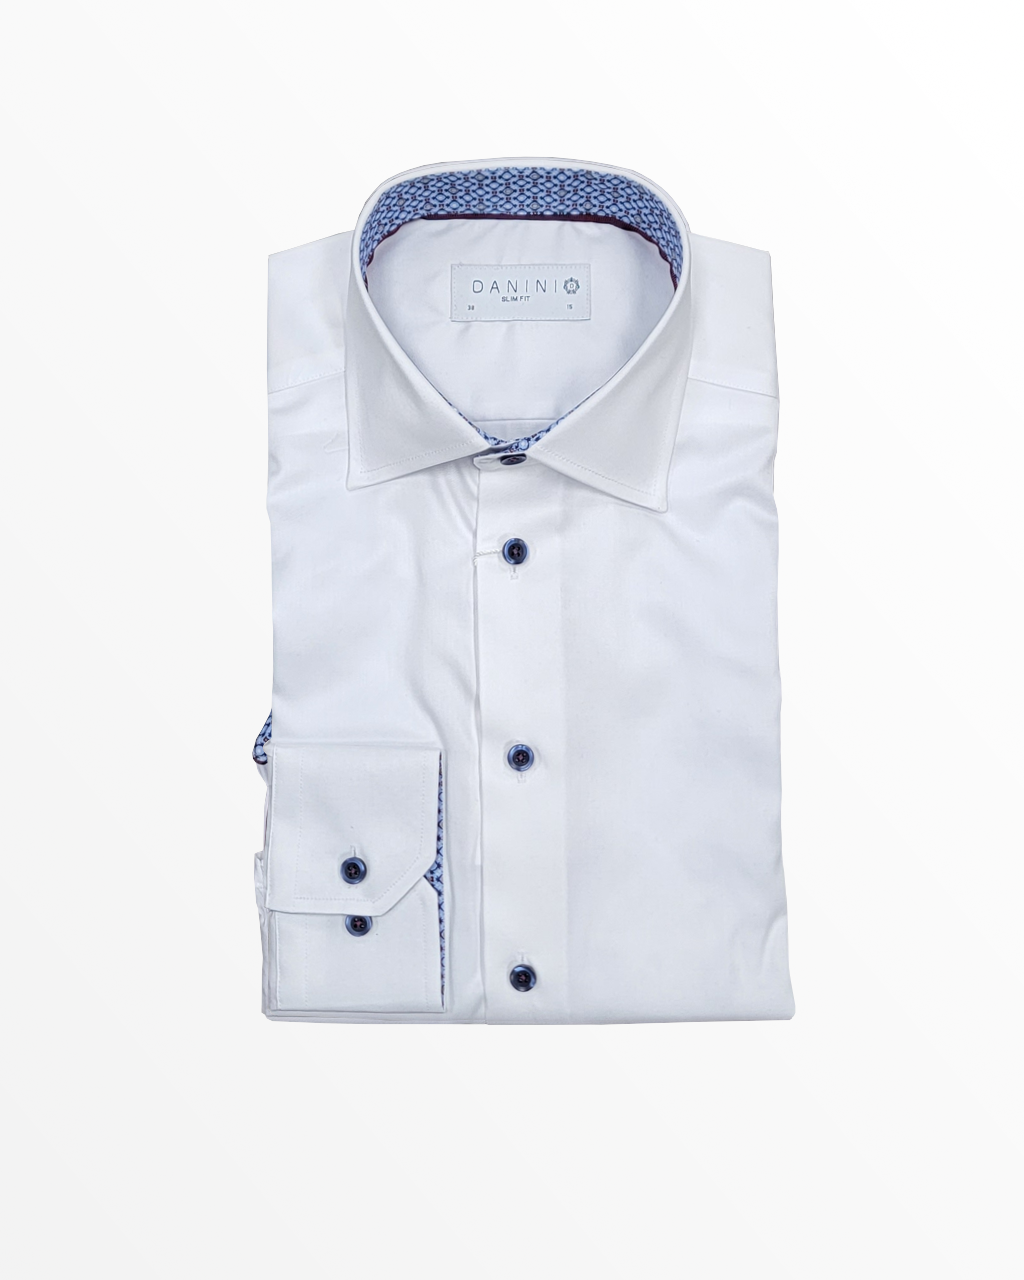 Danini Slim Fit Dress Shirt in White with Blue Detailing